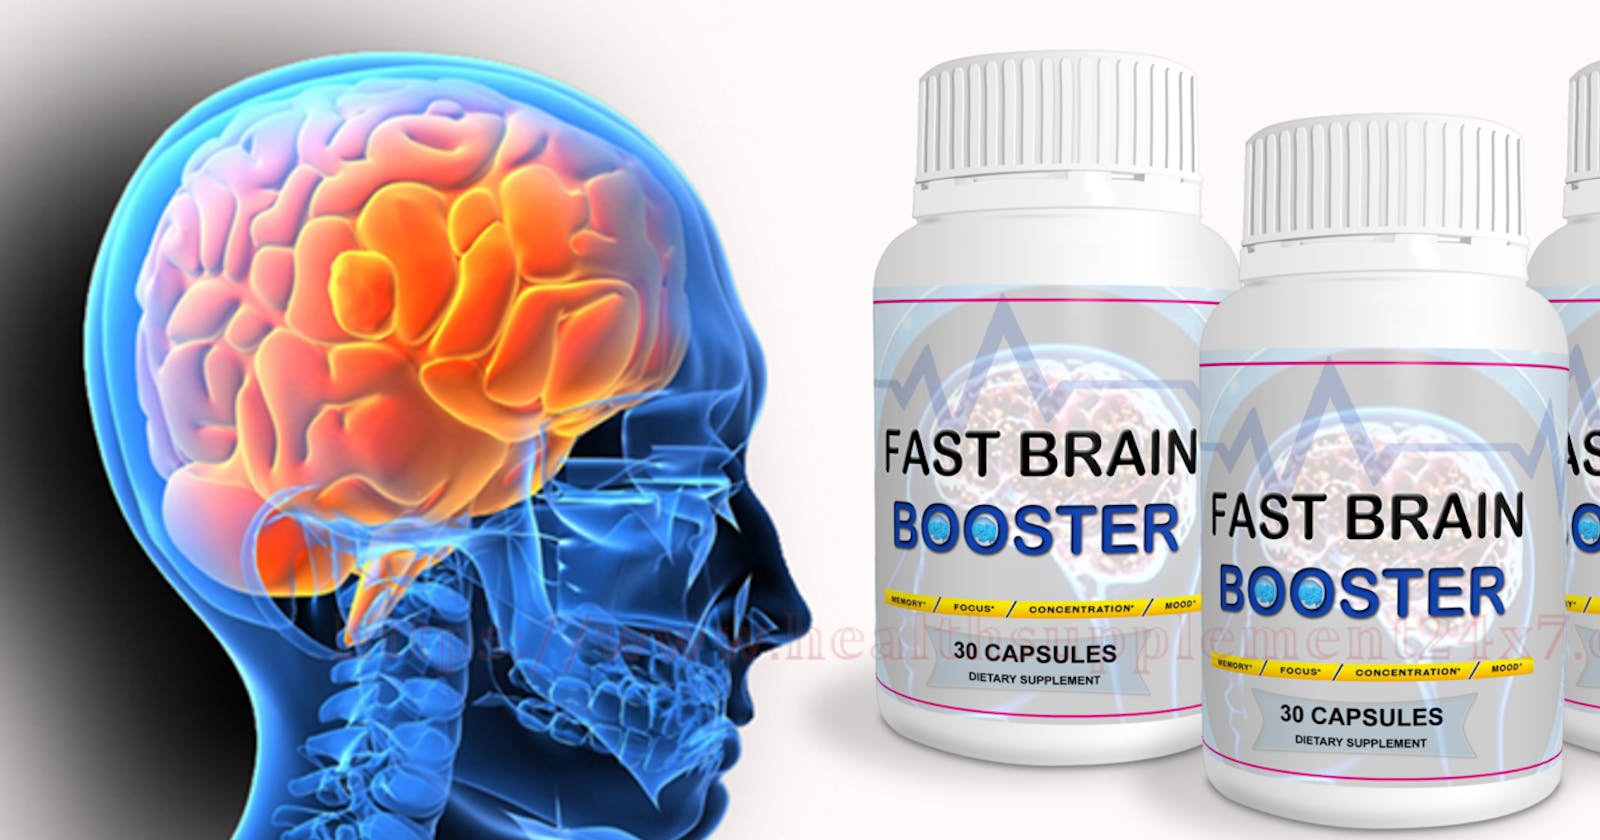 Fast Brain Booster [#1 Premium Cognitive Capsules] Improving Mental Clarity And Ability To Focus(Spam Or Legit)